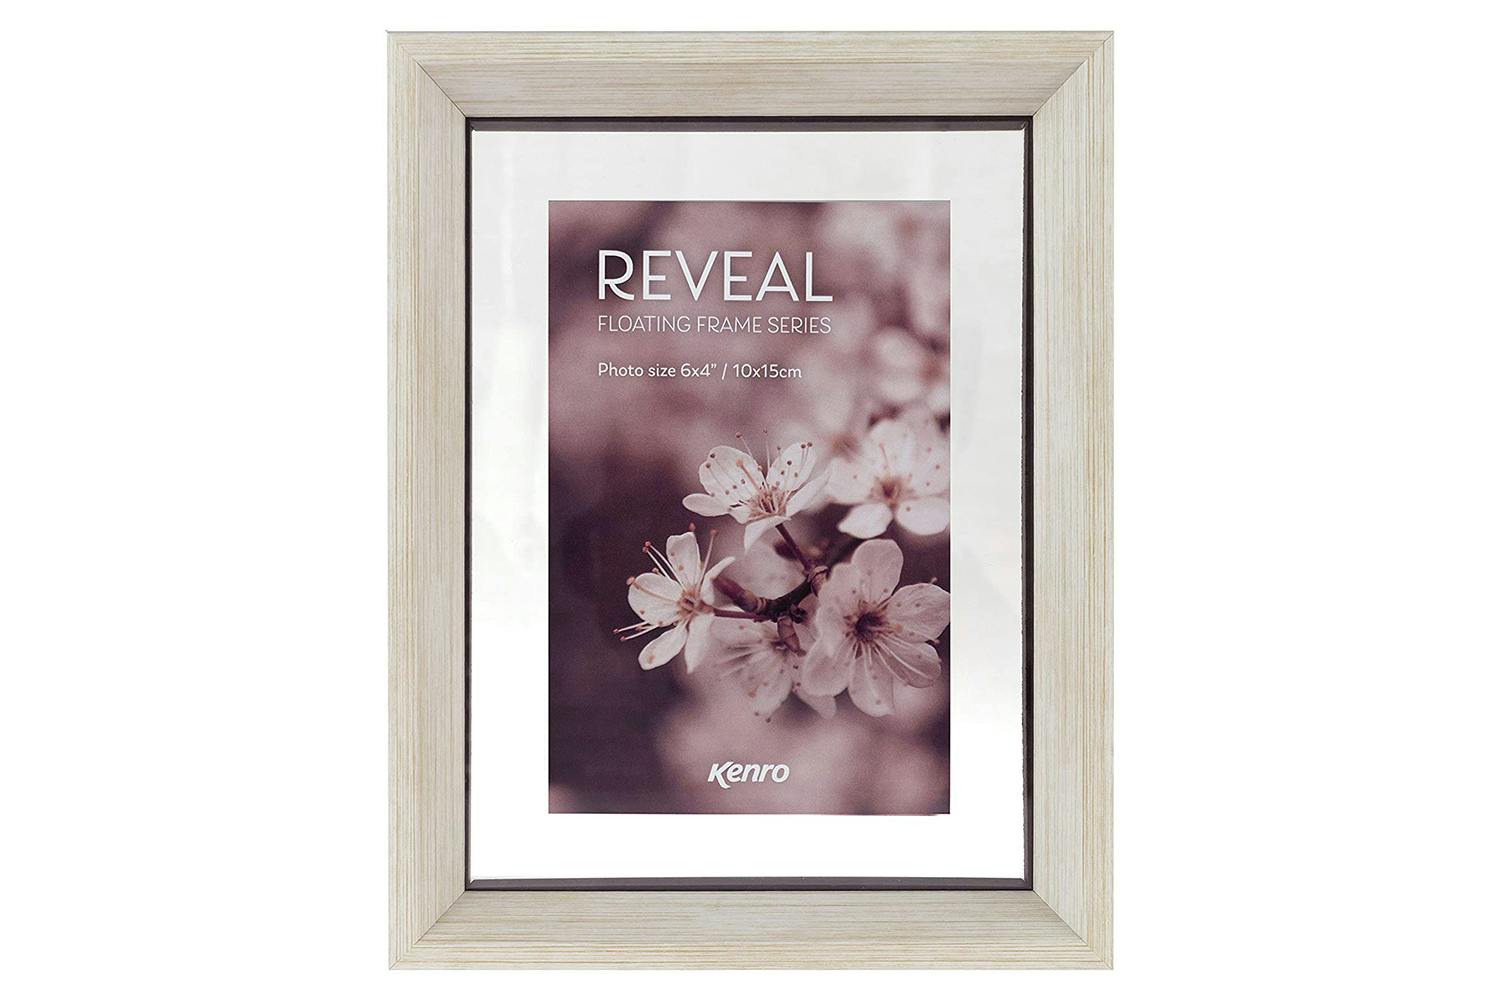 Kenro Reveal Series 6x4" Floating Photo Frame | Natural